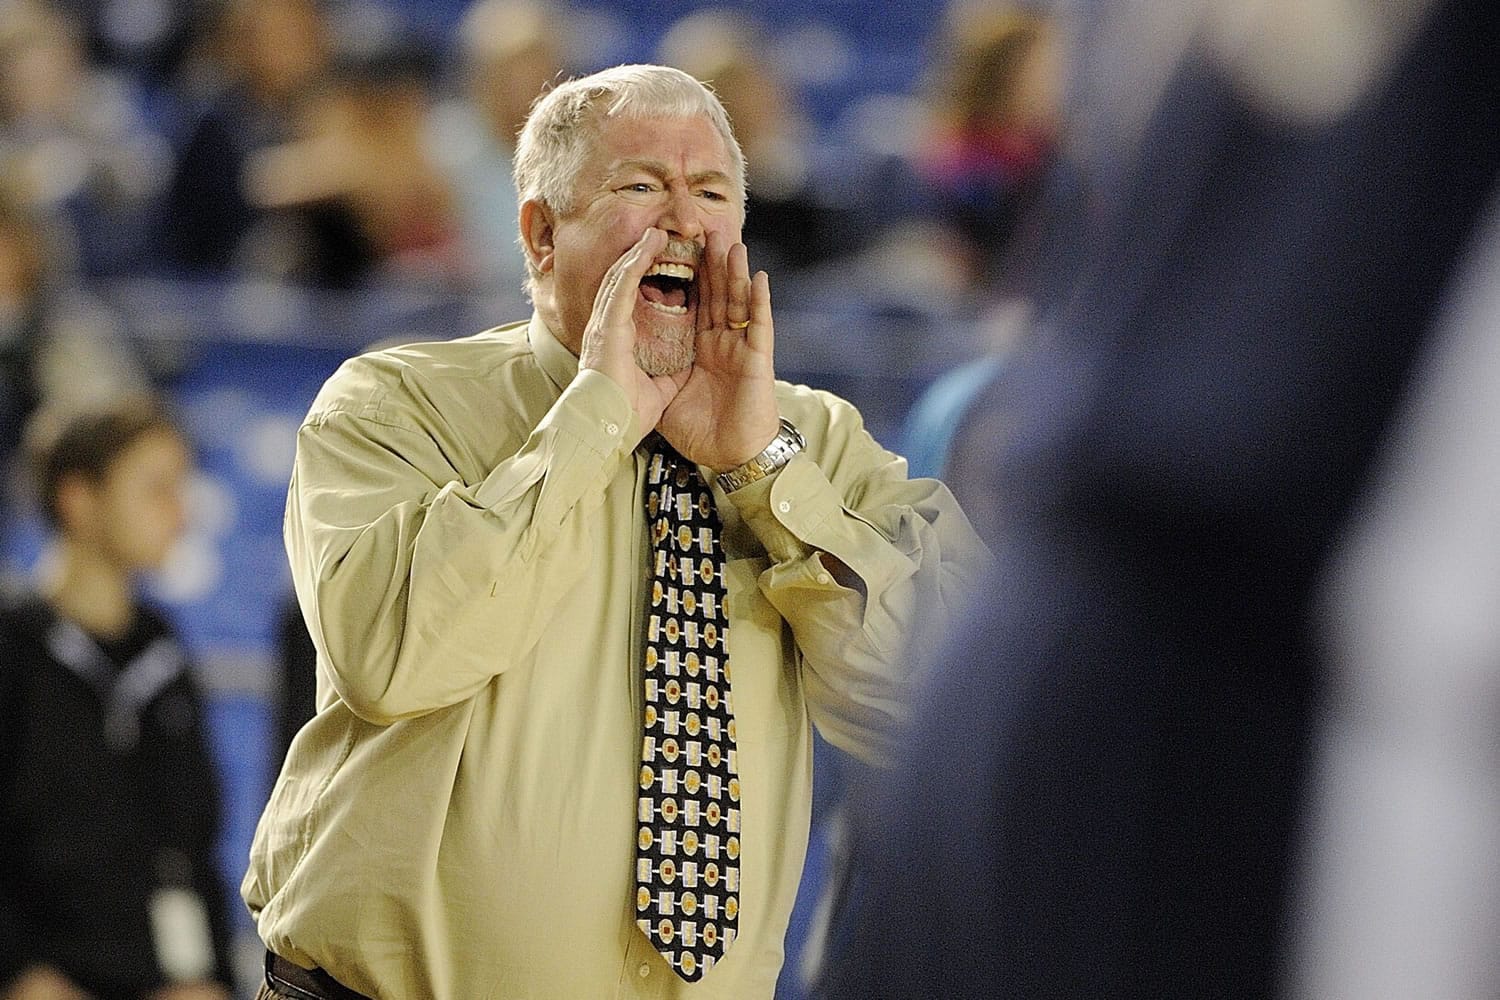 Head girls basketball coach Al Aldridge of Prairie High School yells to his team during a game against Kennedy Catholic Thursday March 3, 2011 at the 2011 Hardwood Classic 3A Girls State Basketball Championships at the Tacoma Dome in Tacoma, Washington.